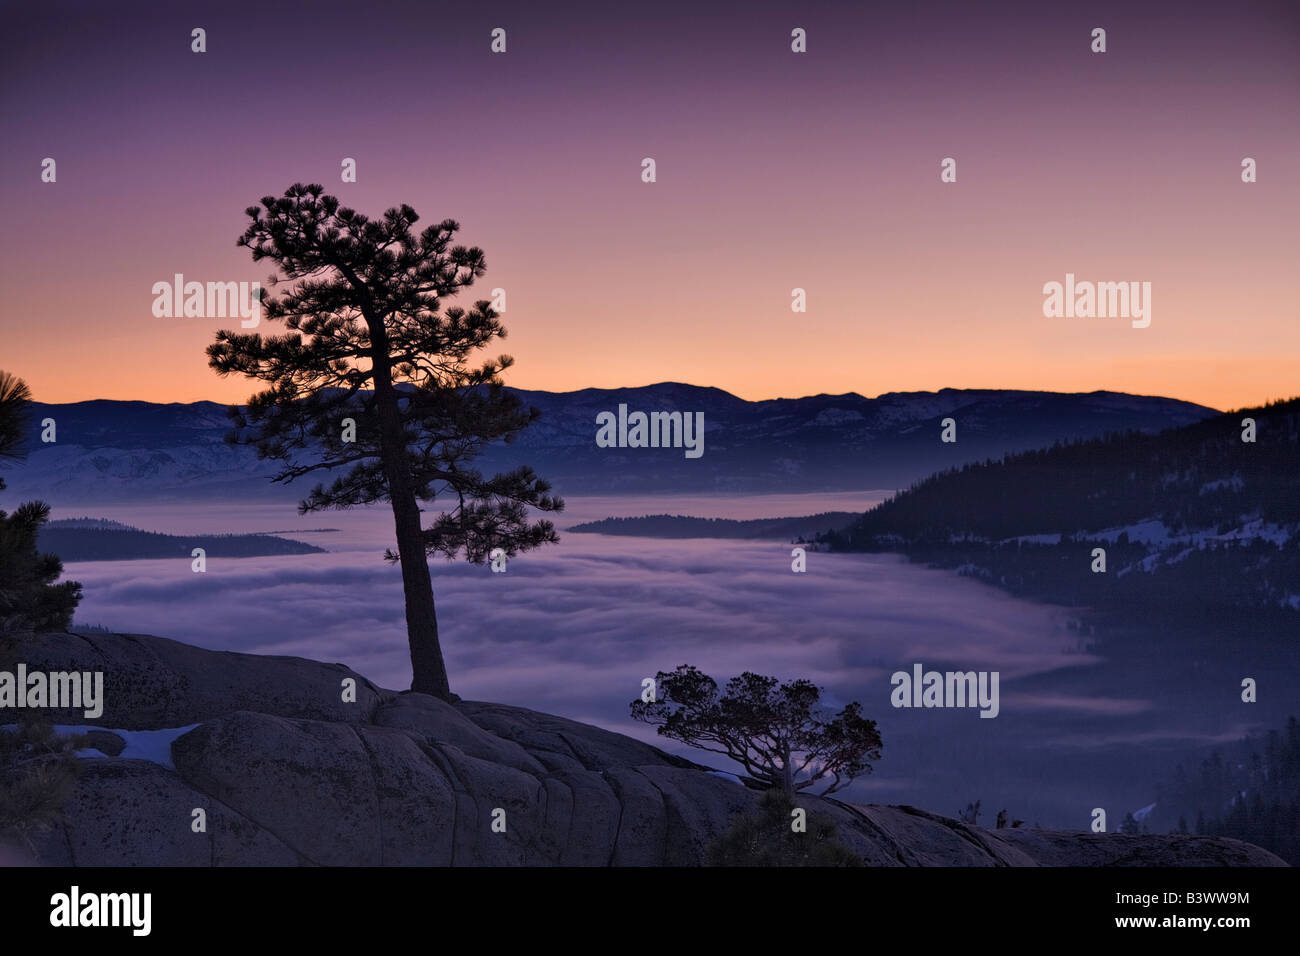 Silhouette of a tree at sunset, Donner Lake, California, USA Stock Photo